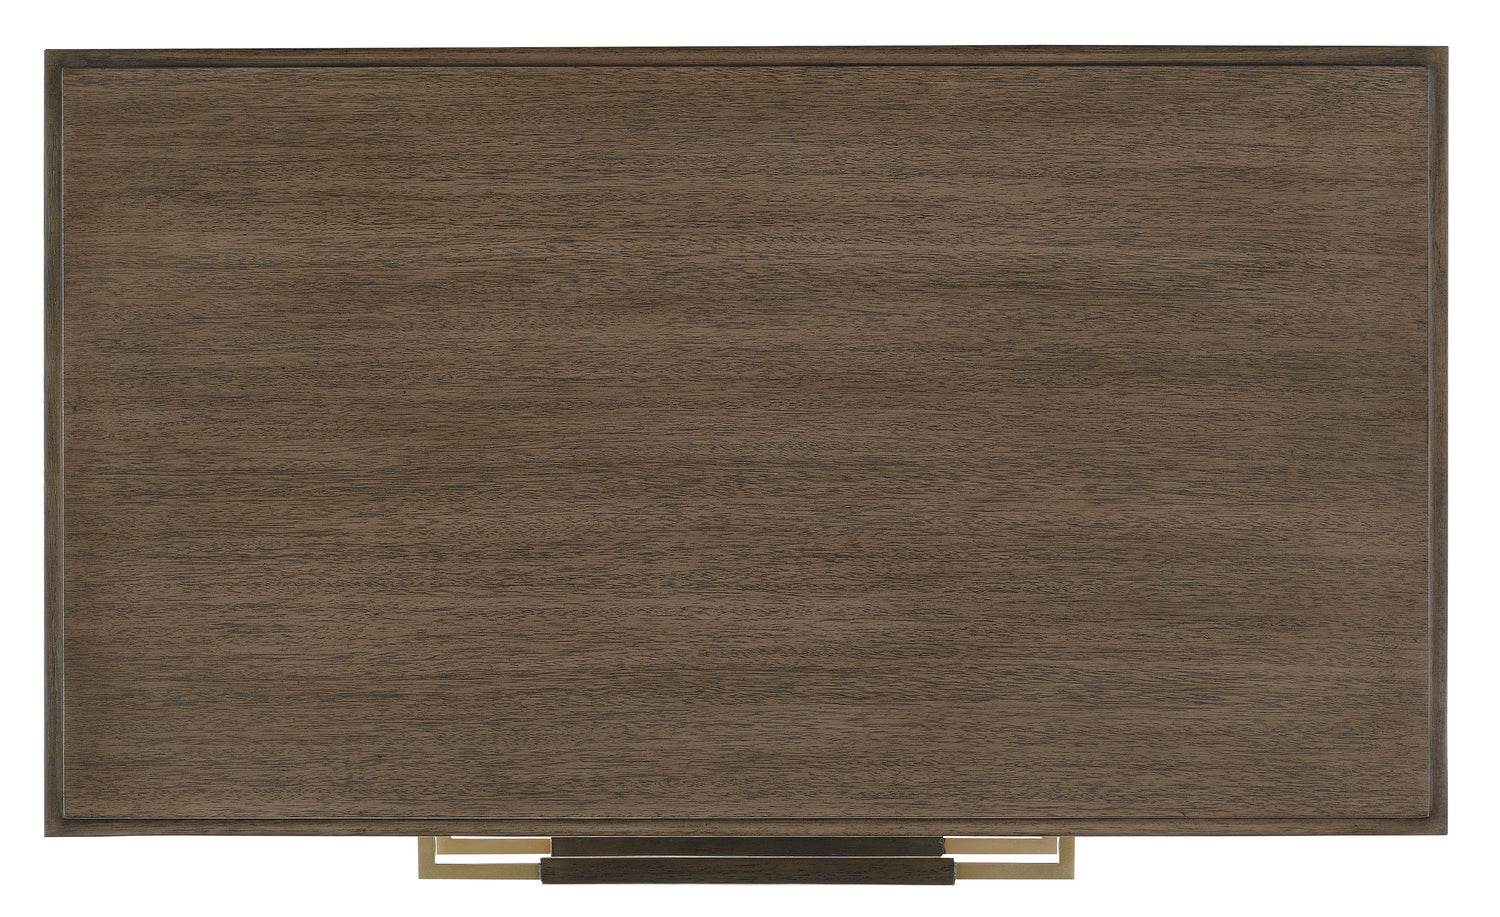 Chest from the Verona collection in Chanterelle/Coffee/Champagne finish